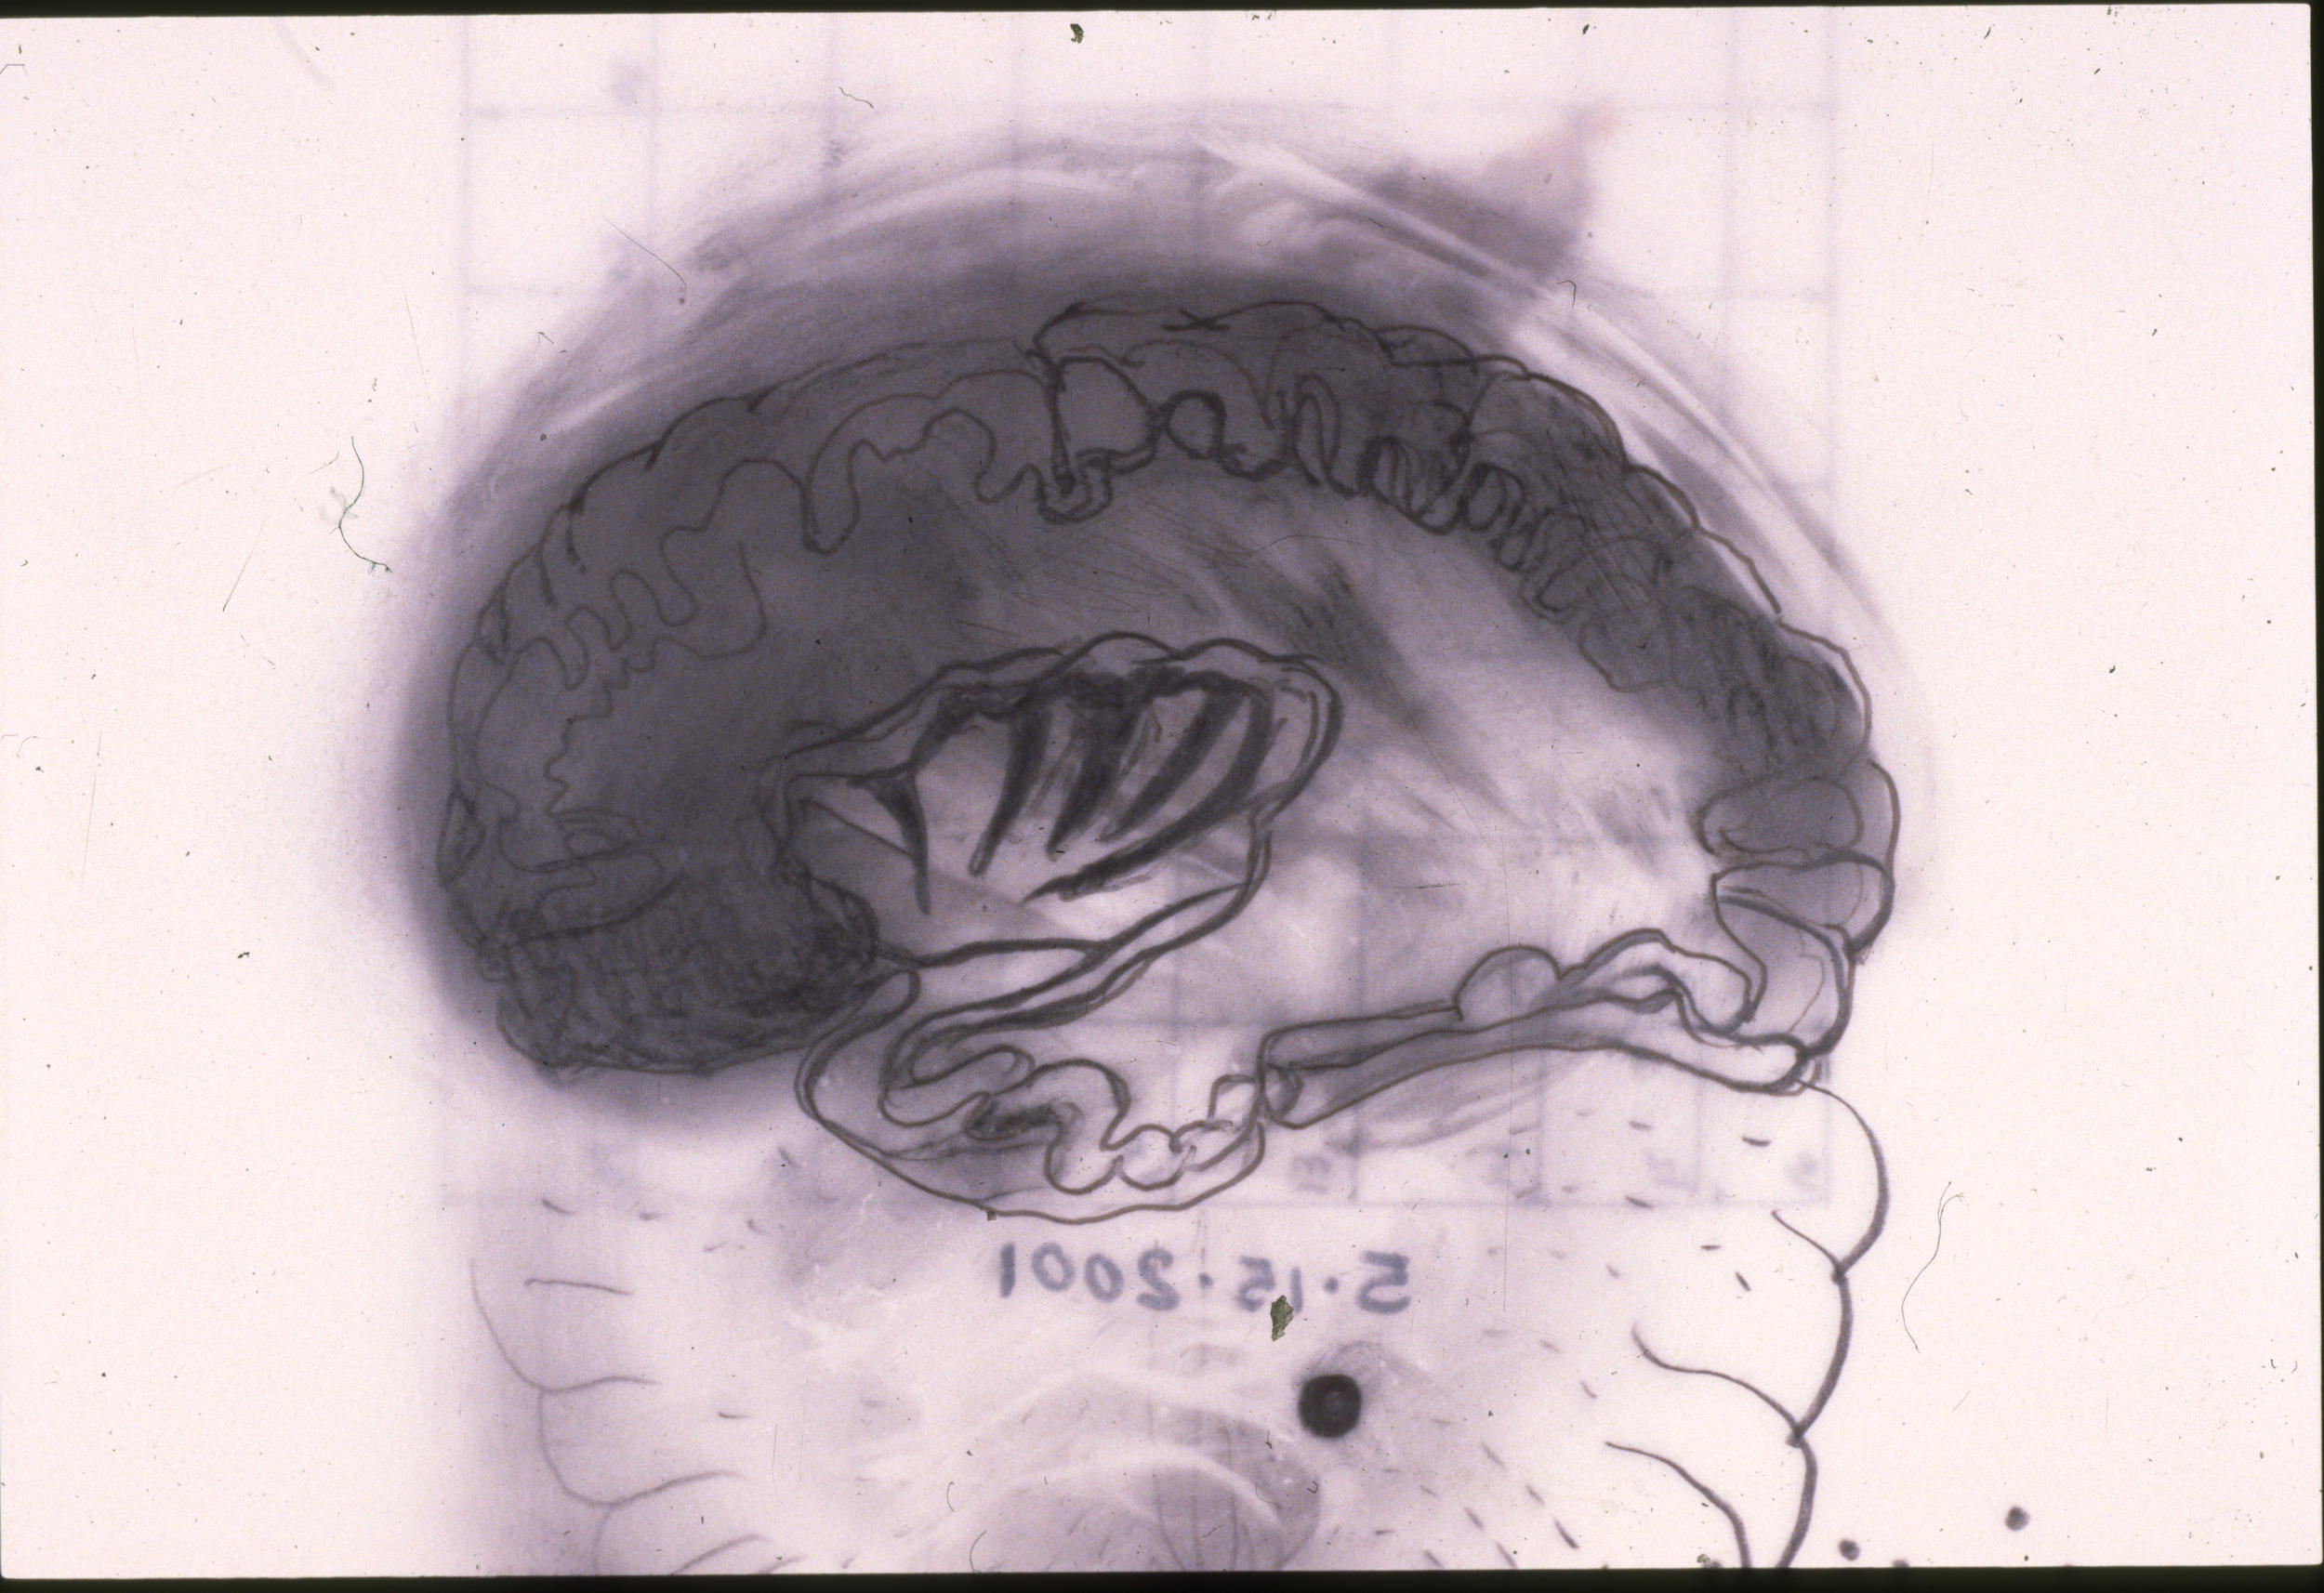 Mapping of Memories Series No. 5, graphite on Mylar, 9 x 12 inches, 2001